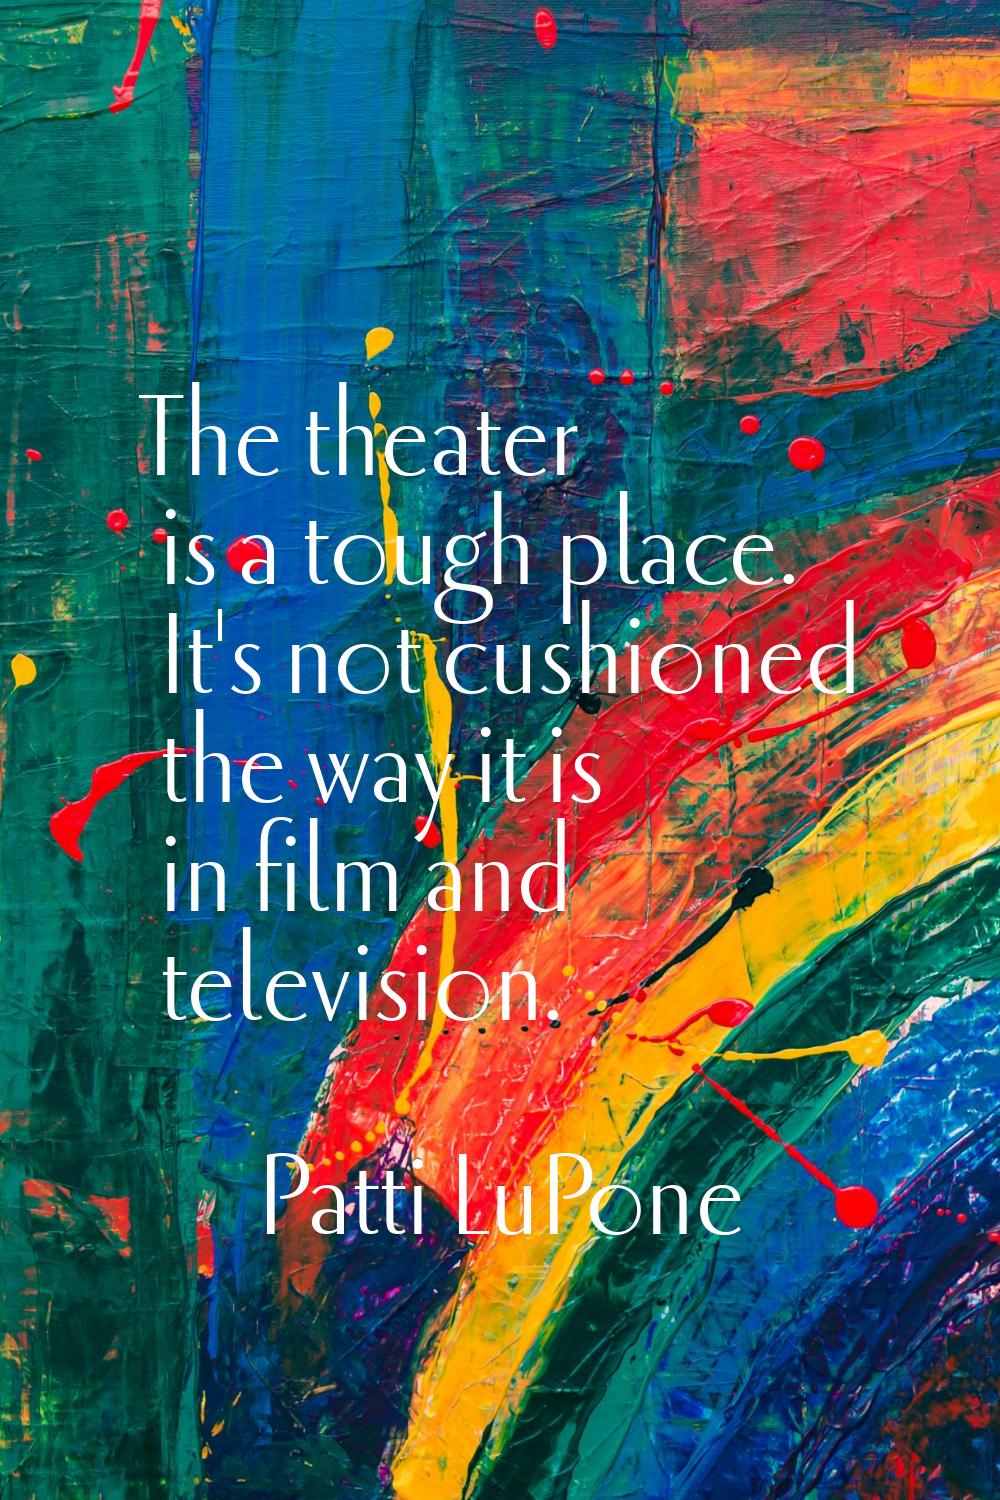 The theater is a tough place. It's not cushioned the way it is in film and television.